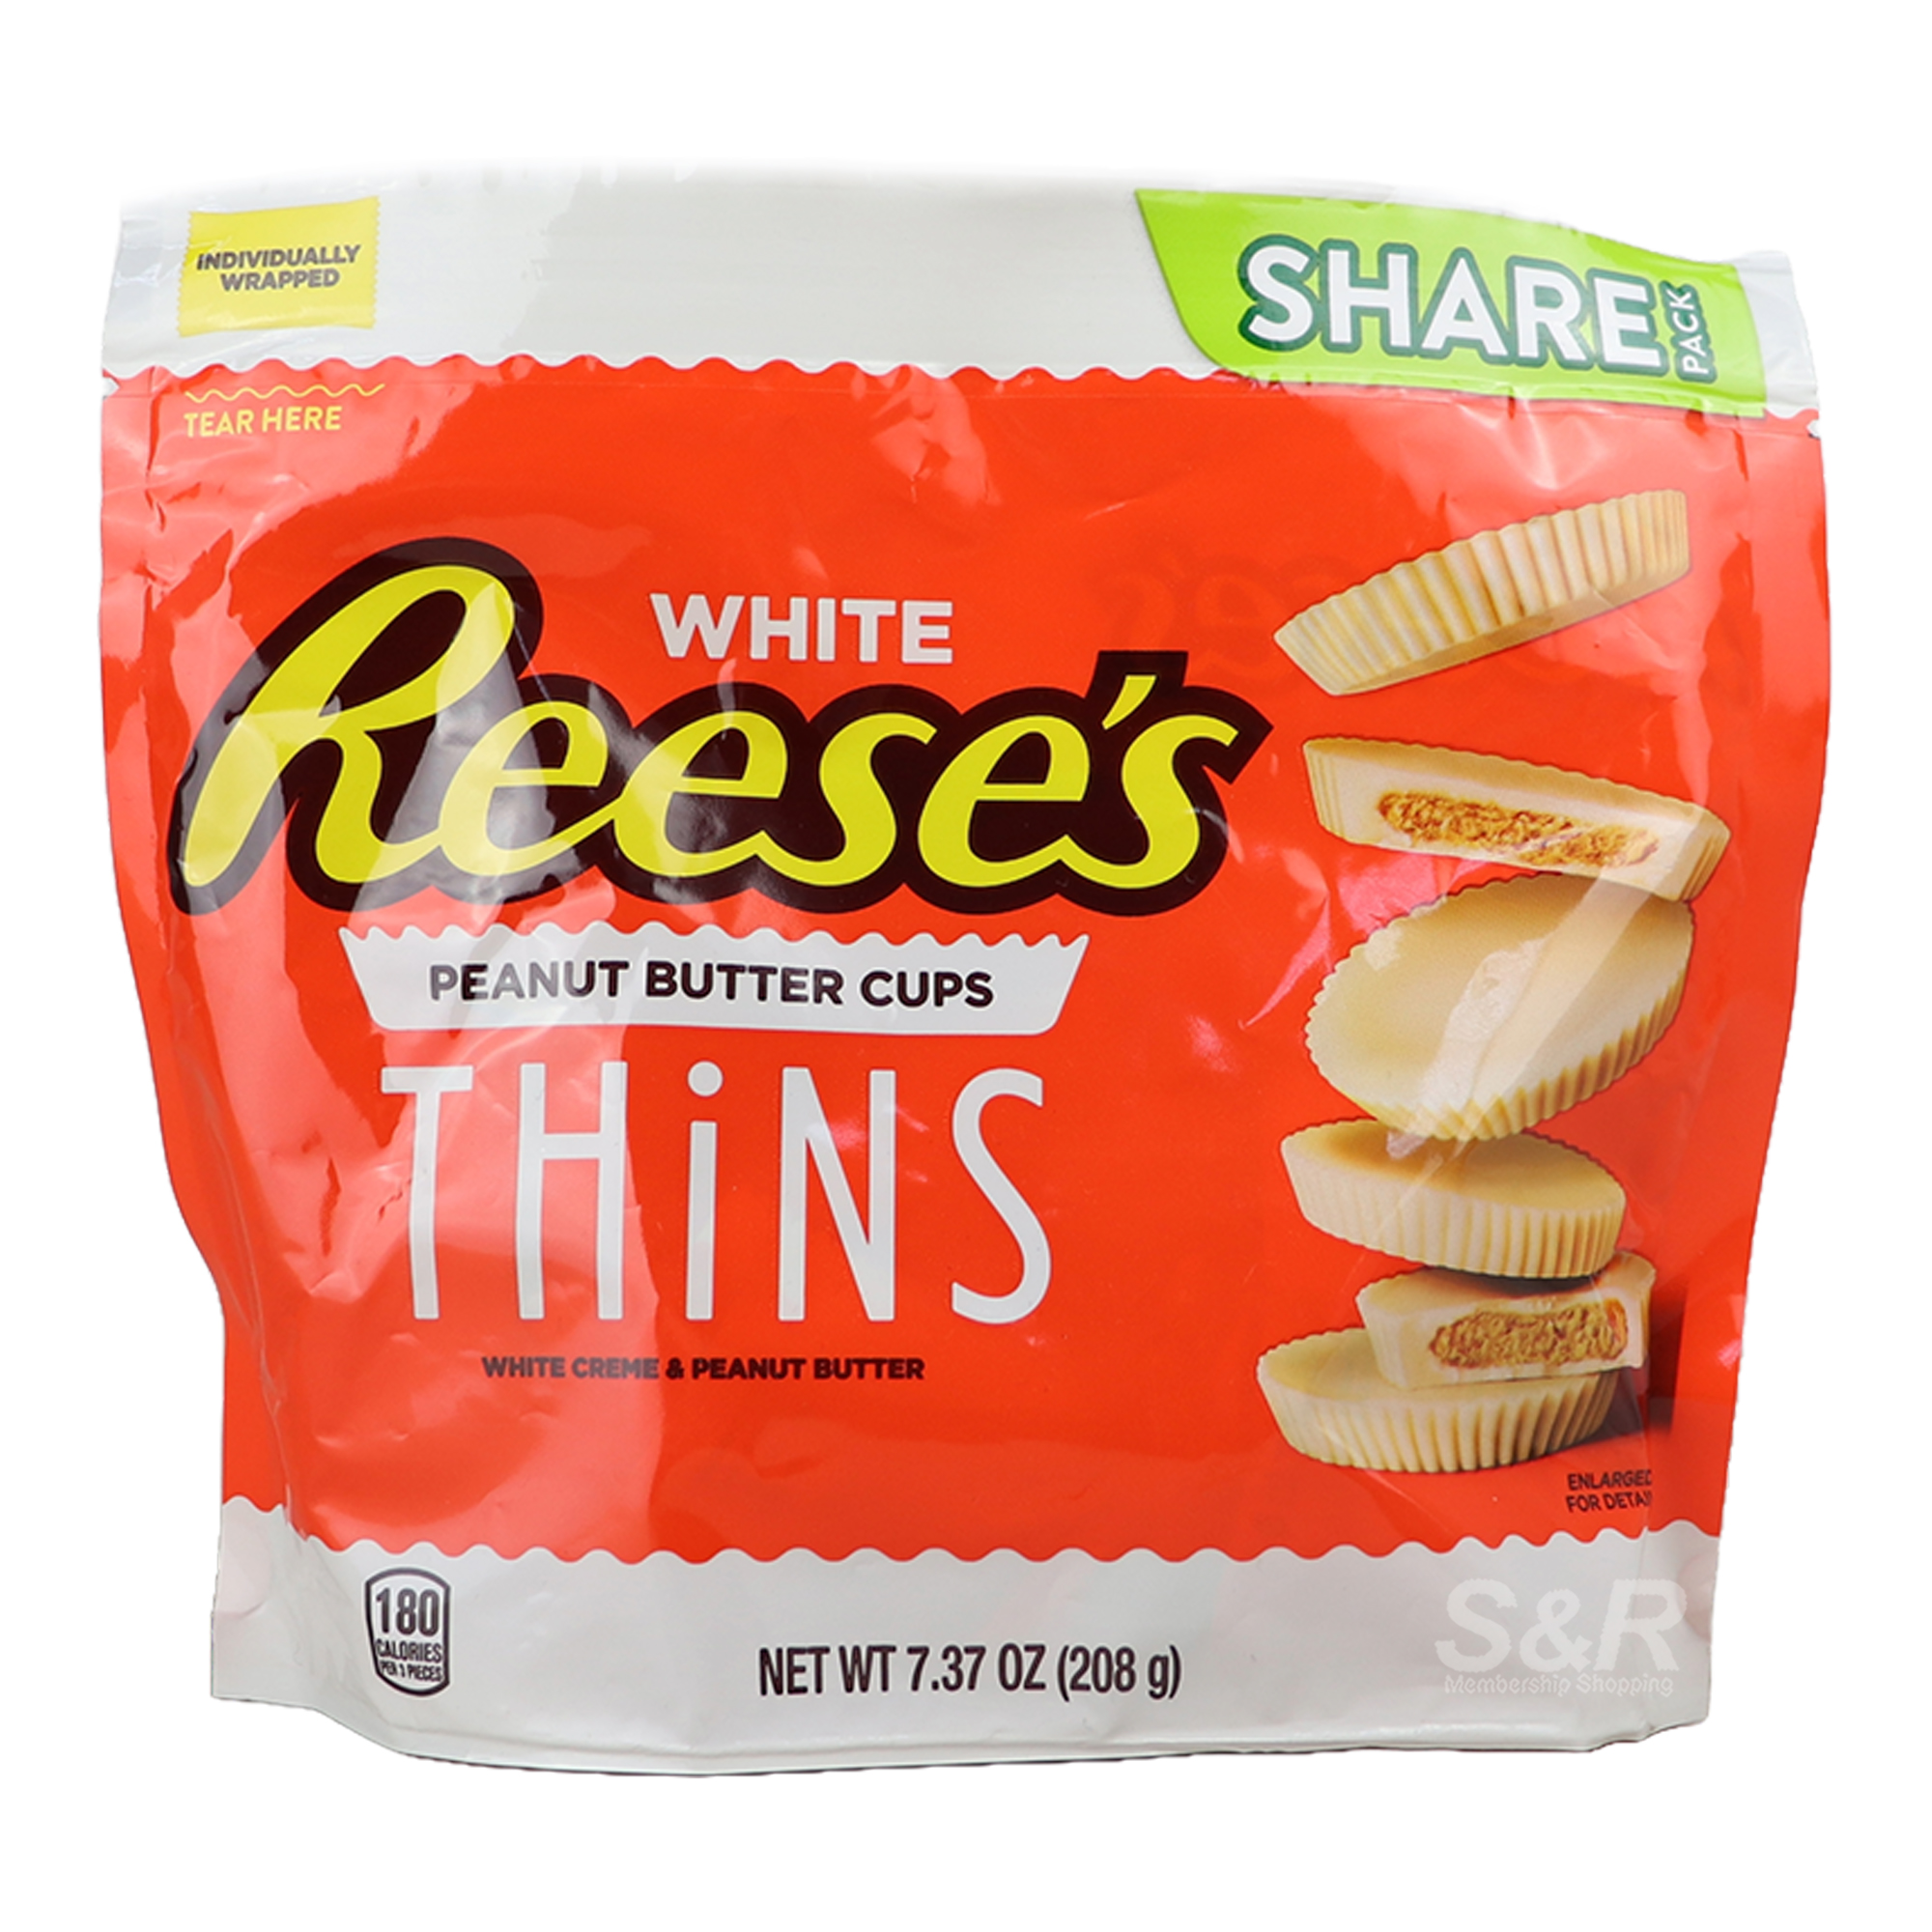 Reese's White Peanut Butter Cups Thins 208g